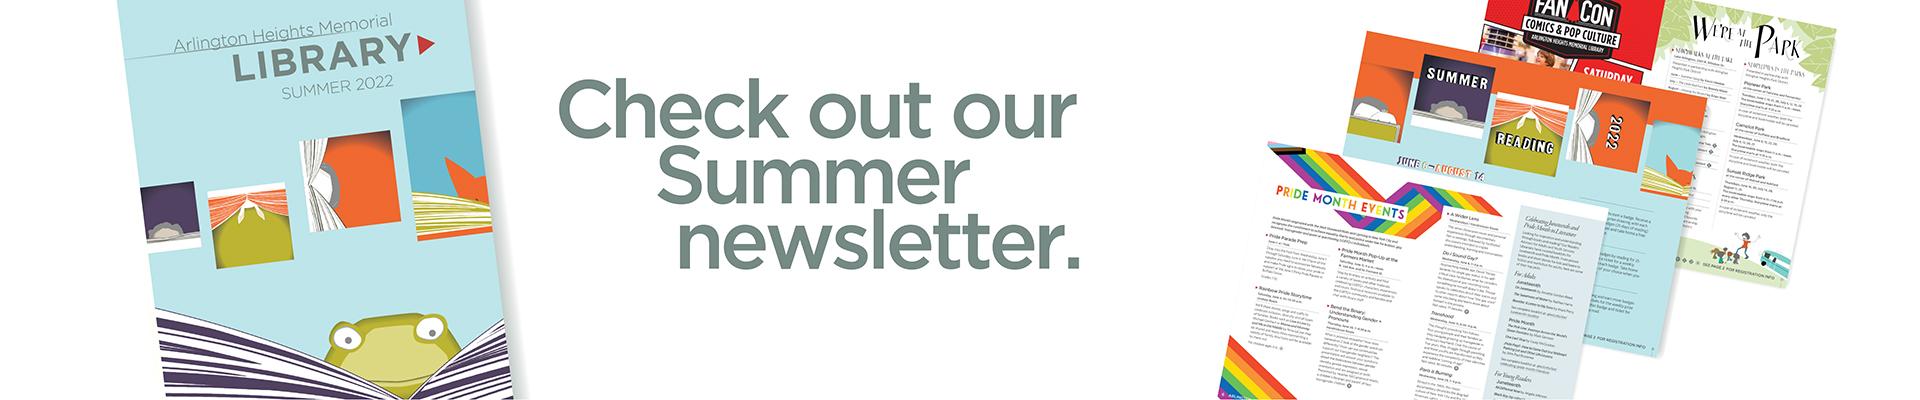 Check out our summer newsletter